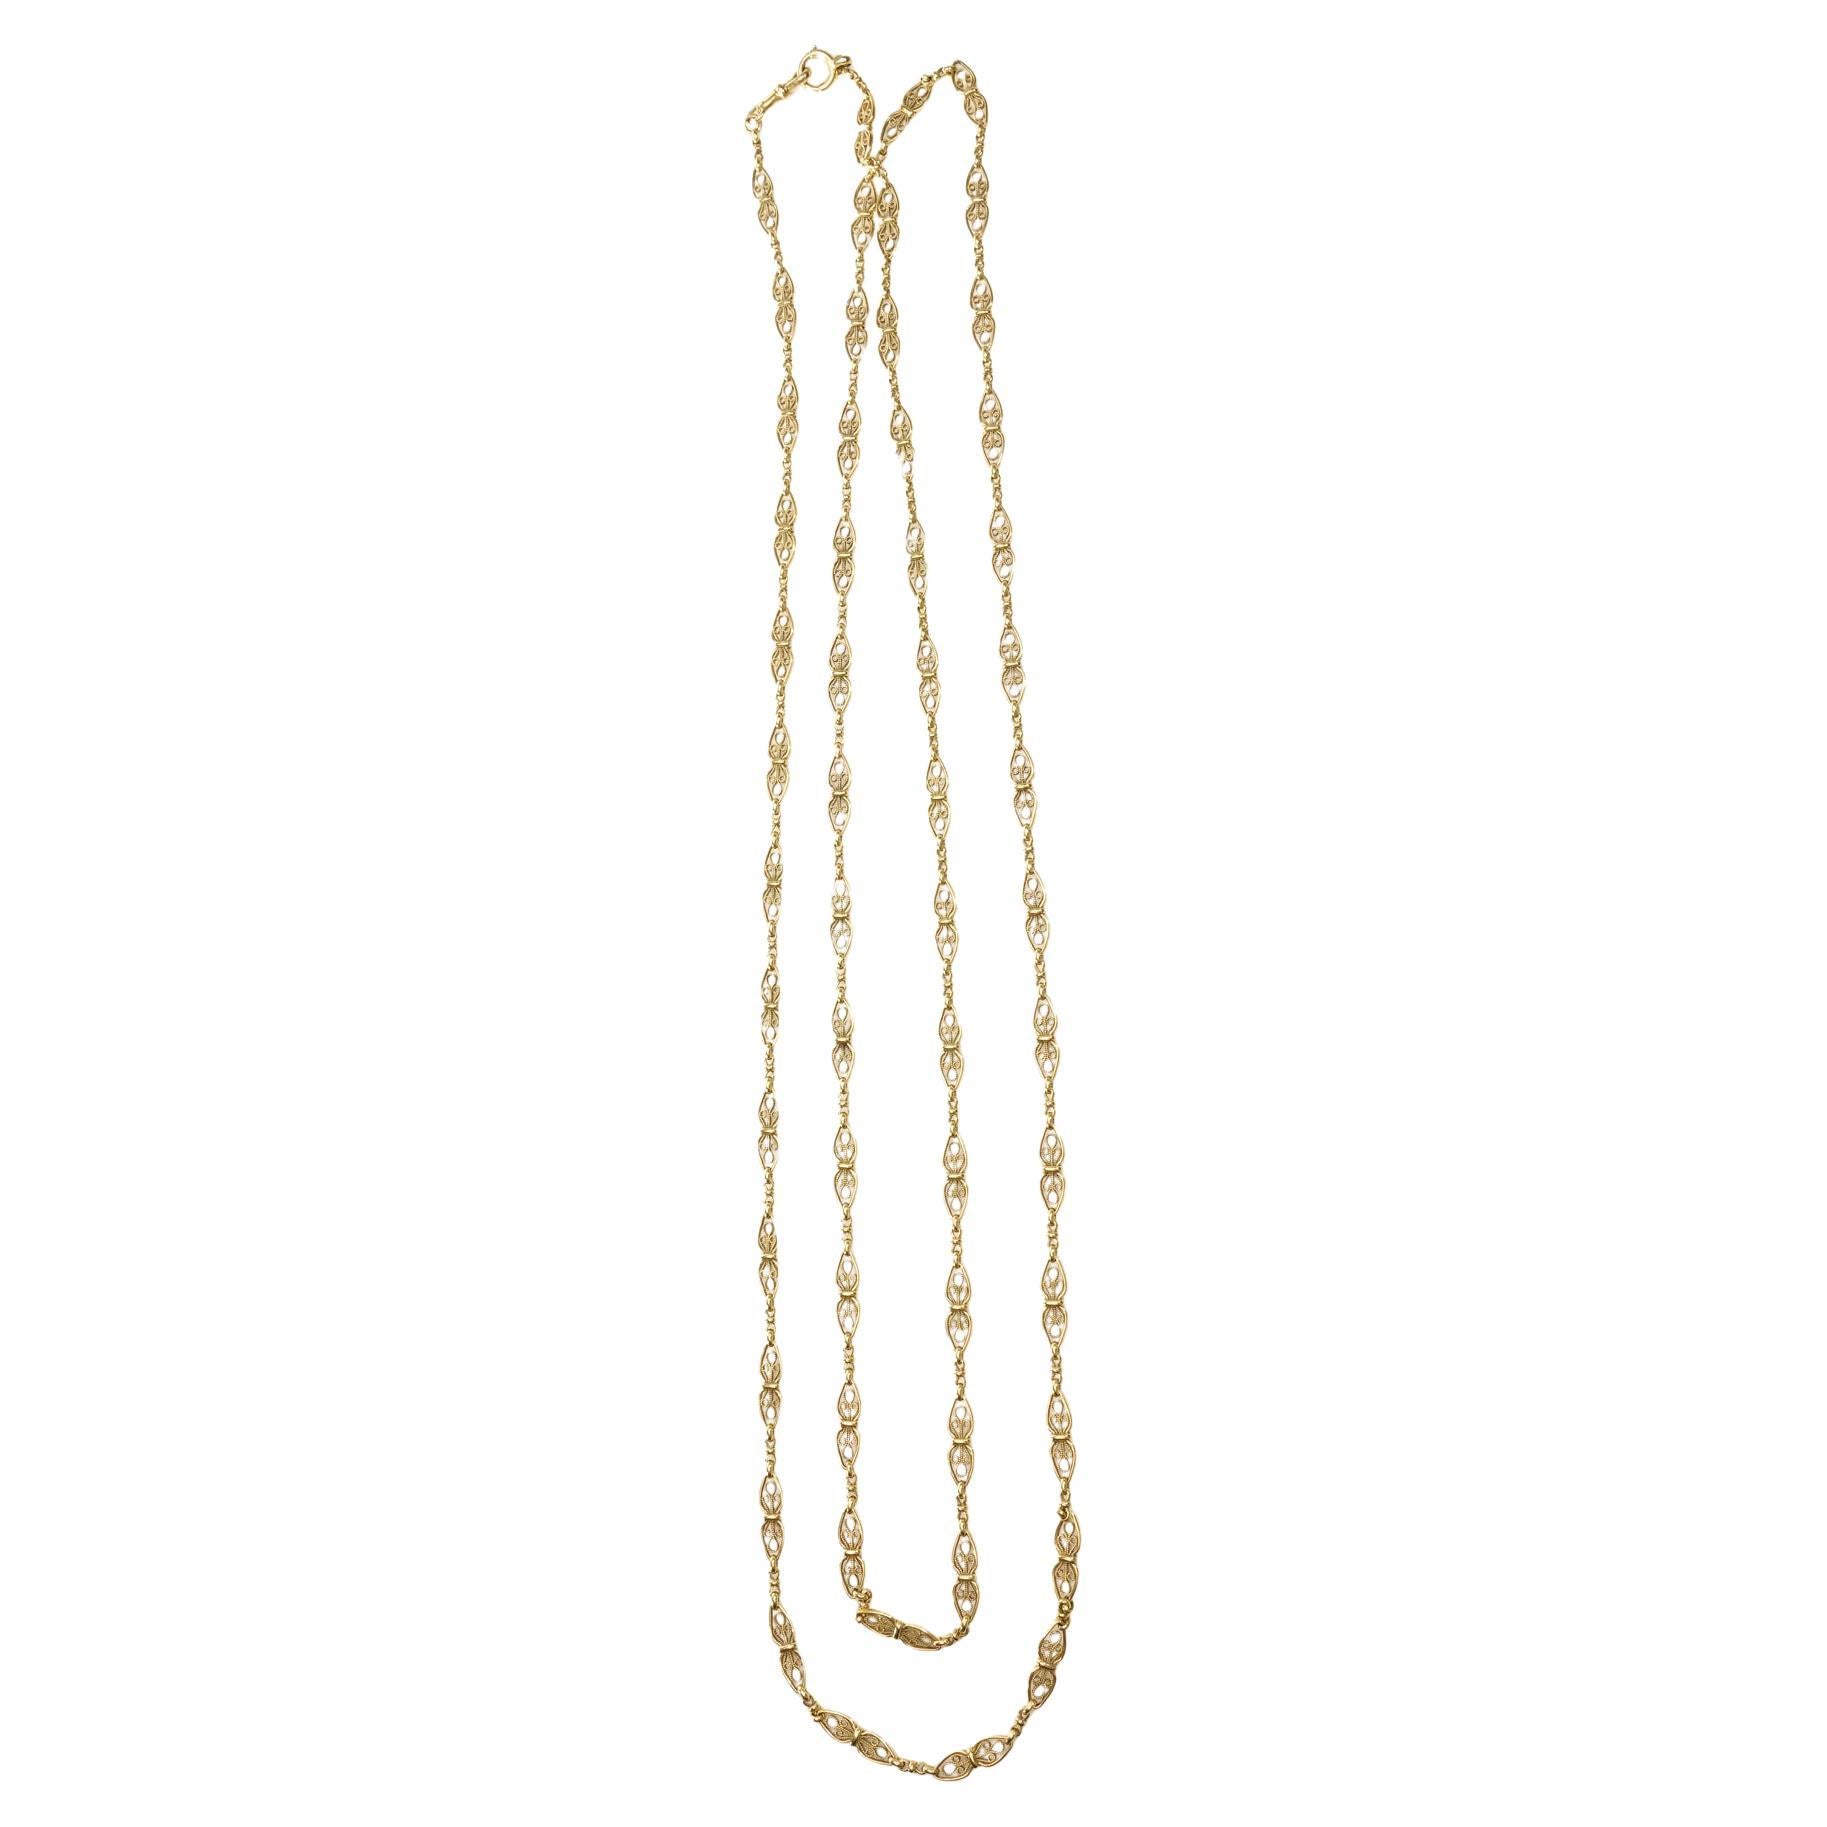 Antique French 18kt Yellow Gold Long Fancy Link Chain Necklace